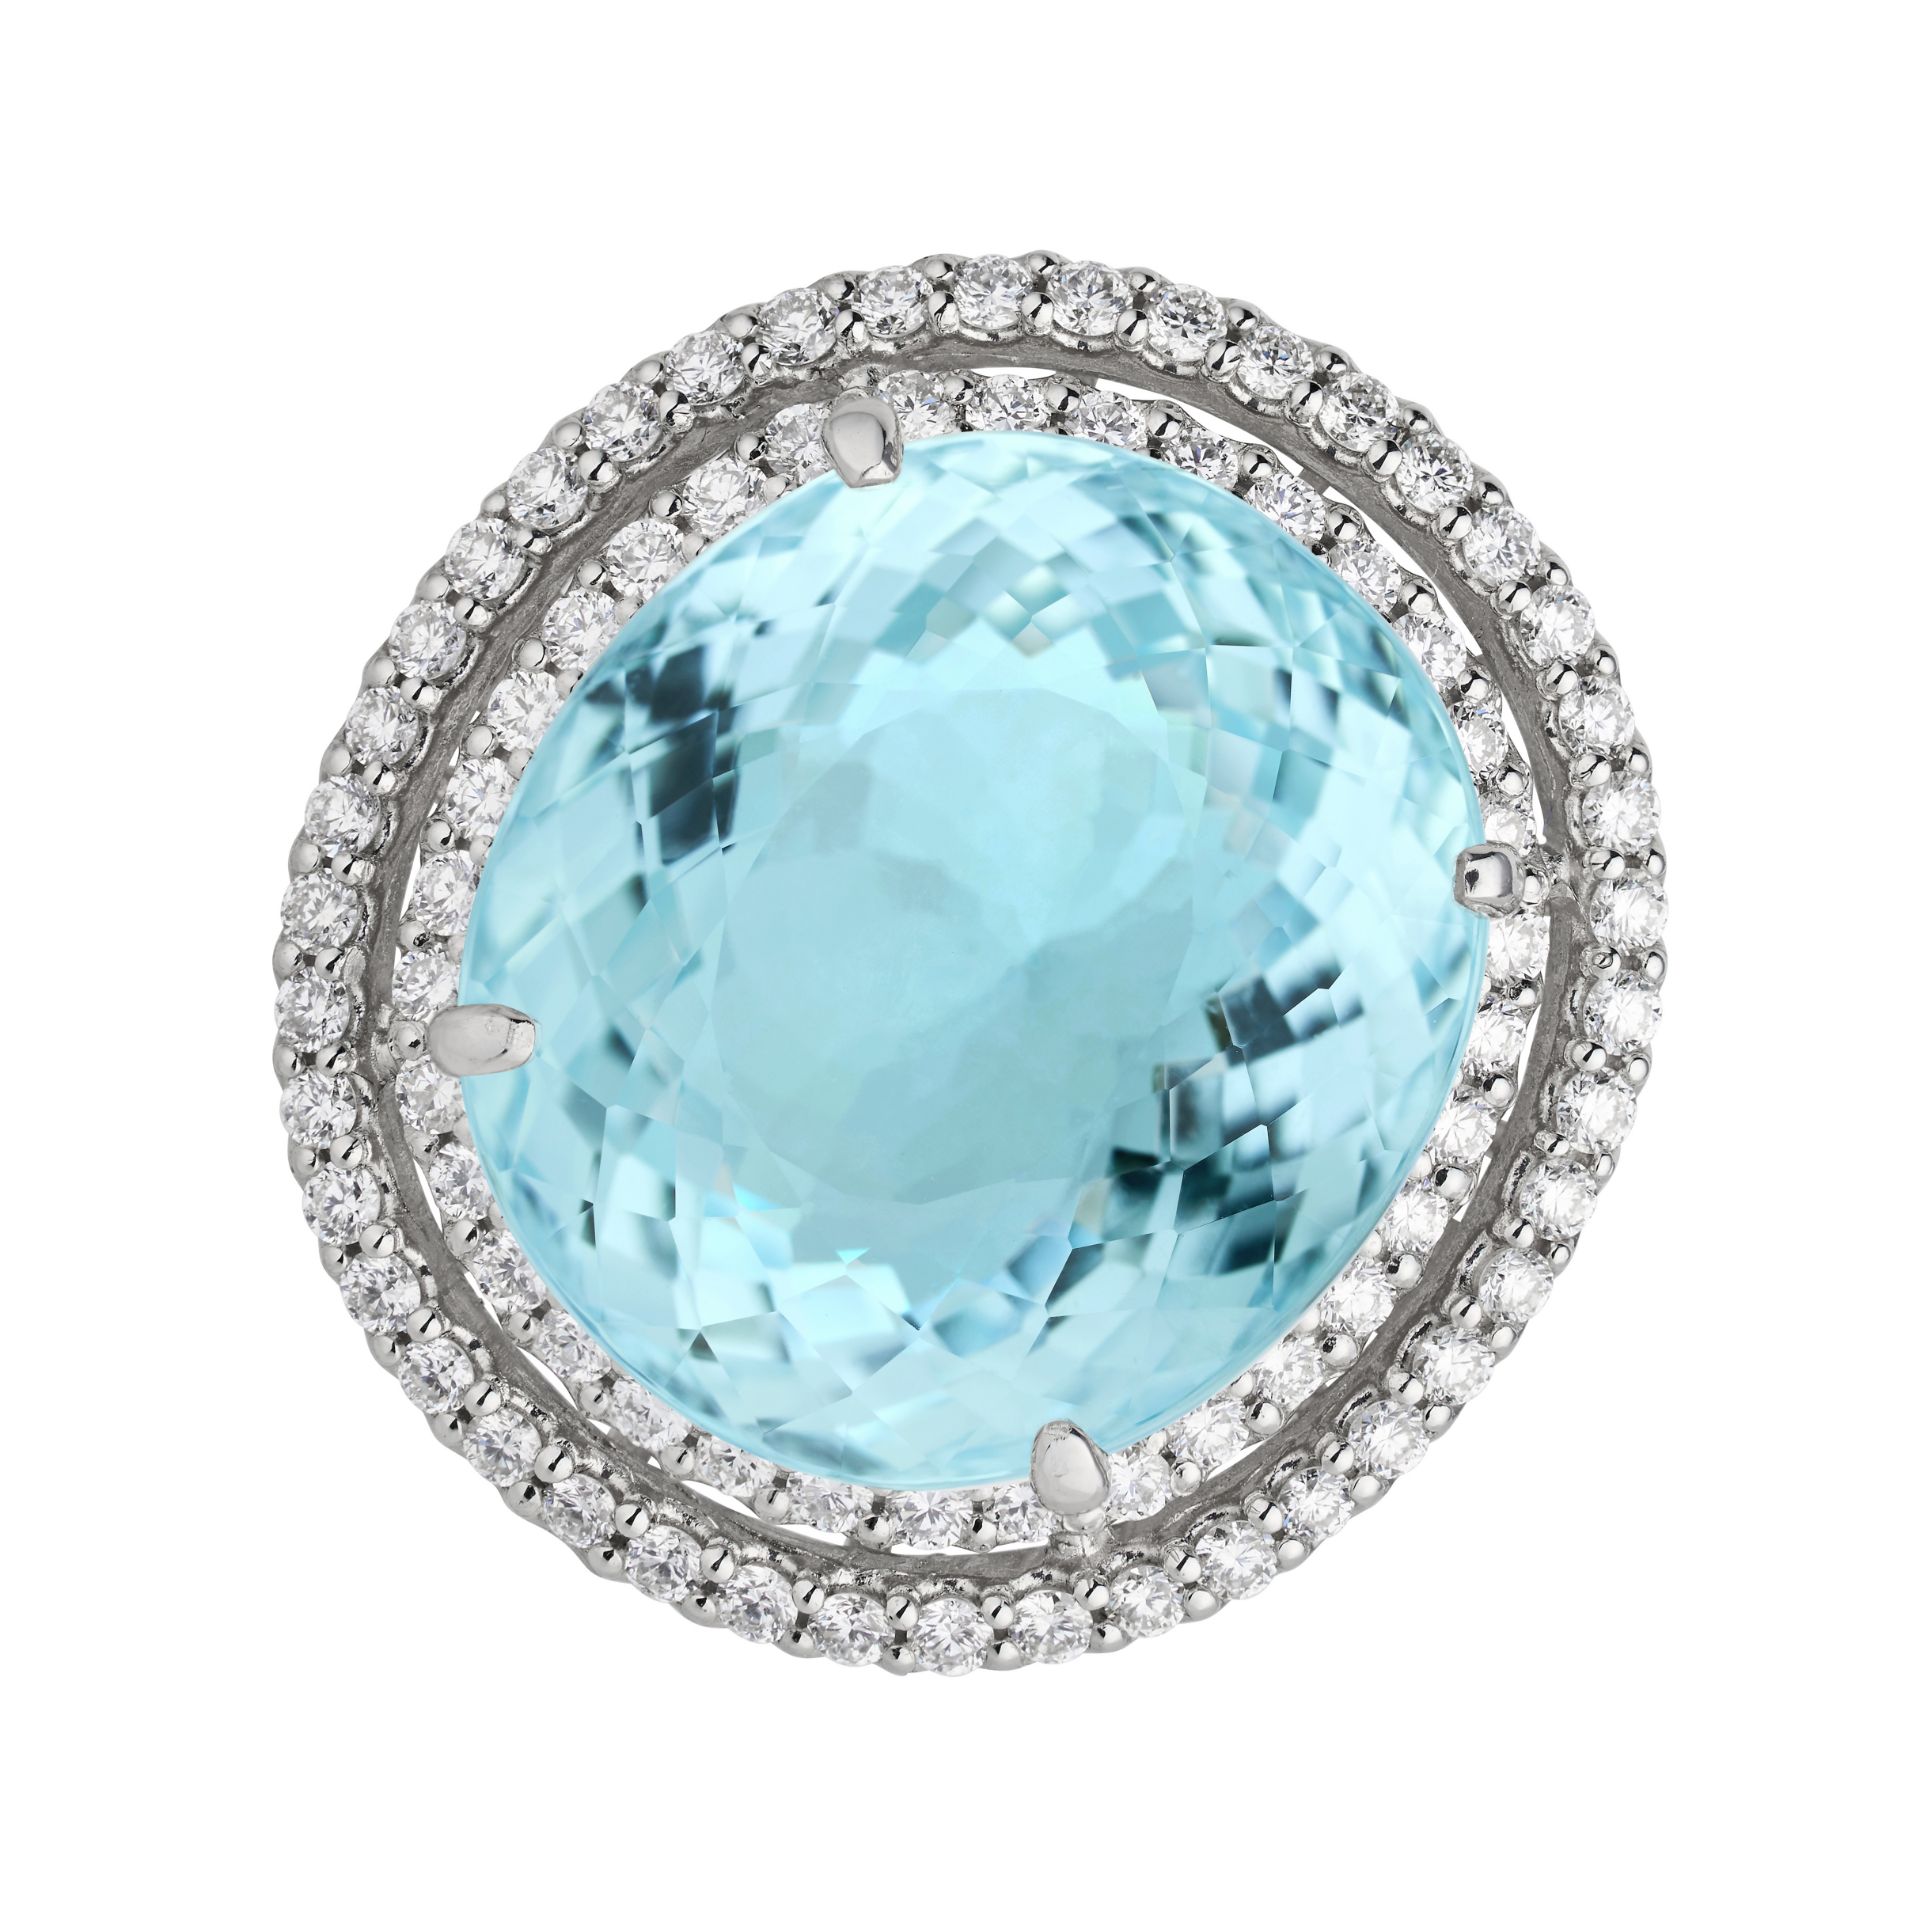 AN IMPORTANT PARAIBA TOURMALINE AND DIAMOND RING in platinum, set with an oval mixed cut Paraiba ... - Image 3 of 5